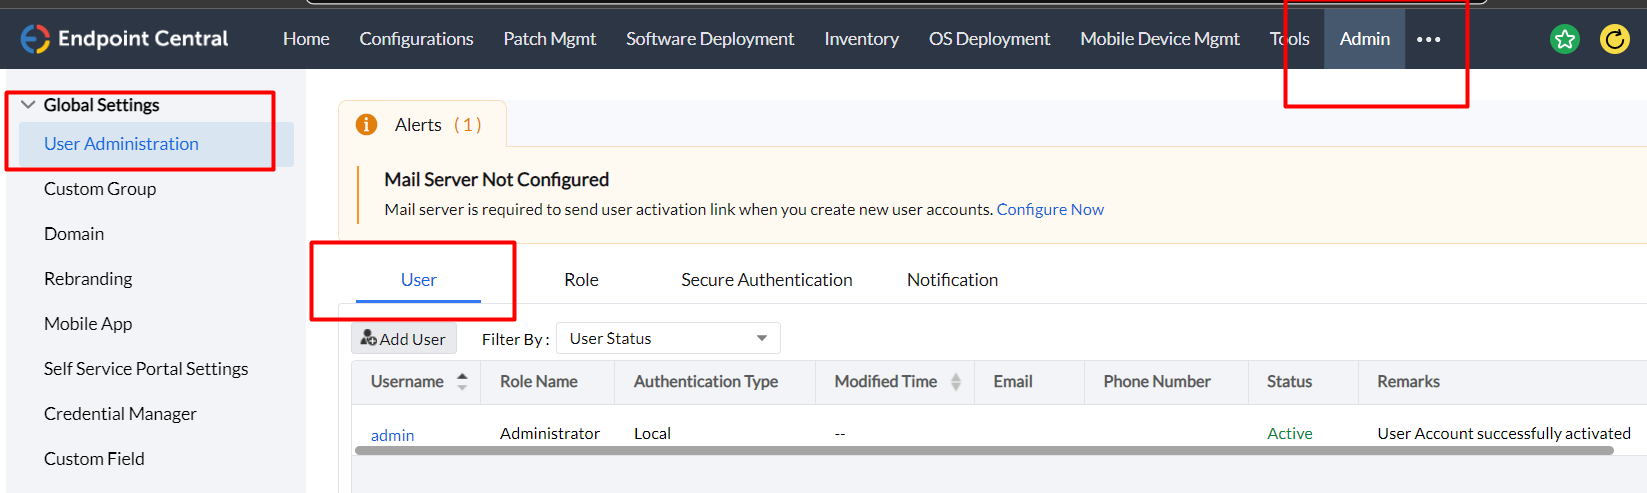 User administration tab in Endpoint Central